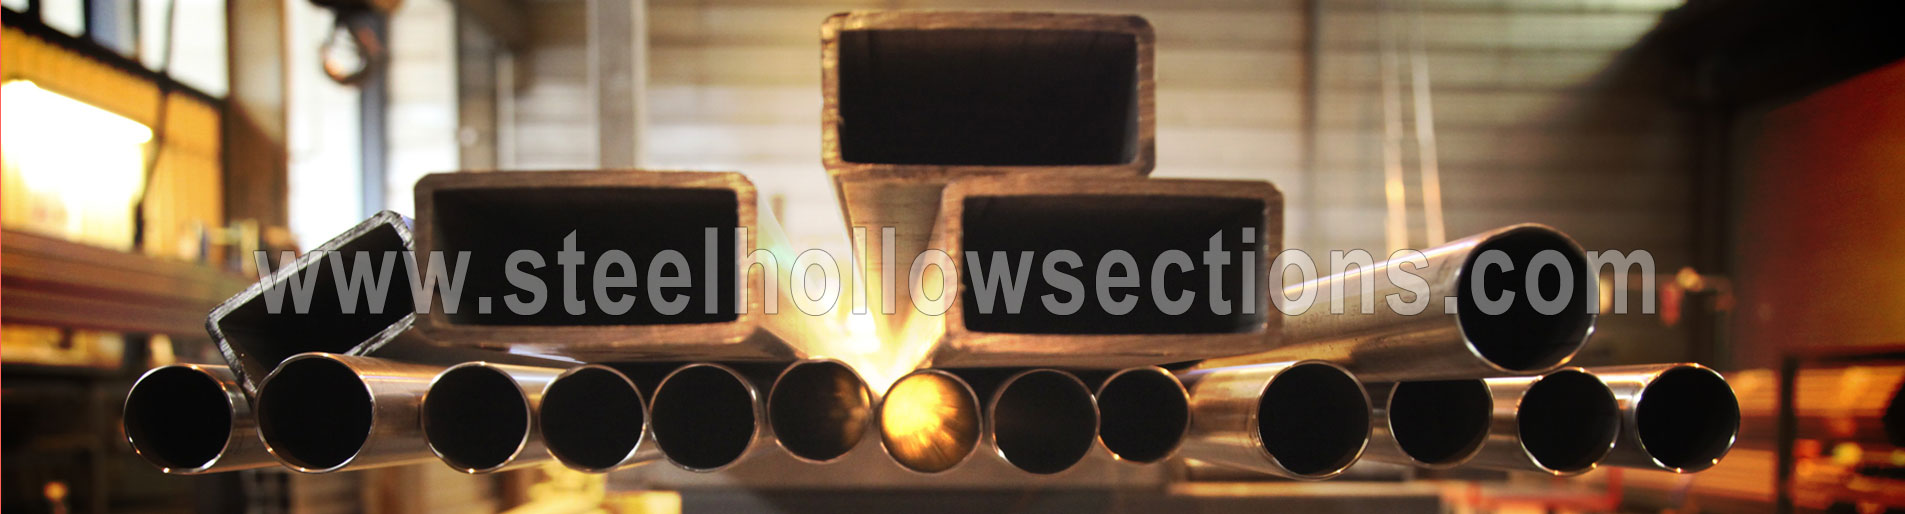 Hollow Section Square Pipe Suppliers Dealers Distributors